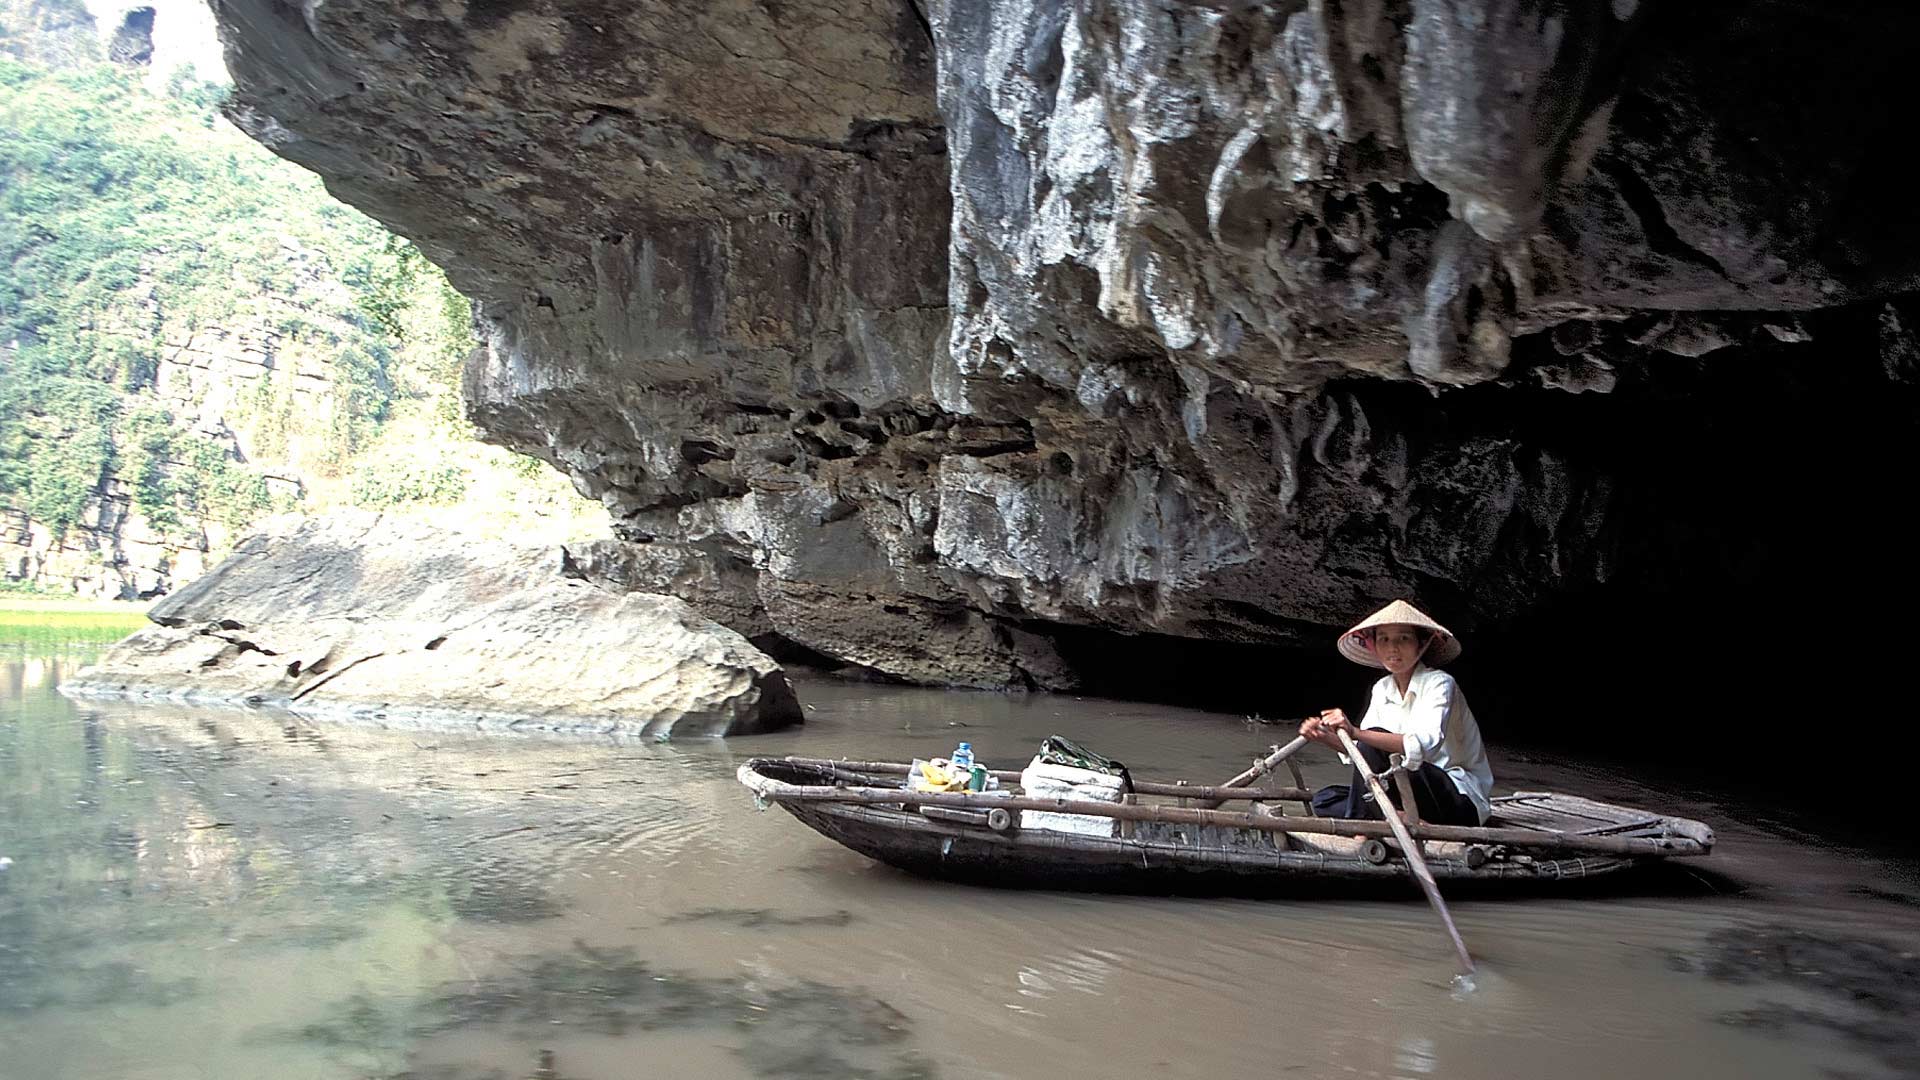 Woman rowing a boat Ngo Dong River exiting Hang Ca Cave in the limestone karst mountains, Tam Coc, Ninh Binh, Vietnam